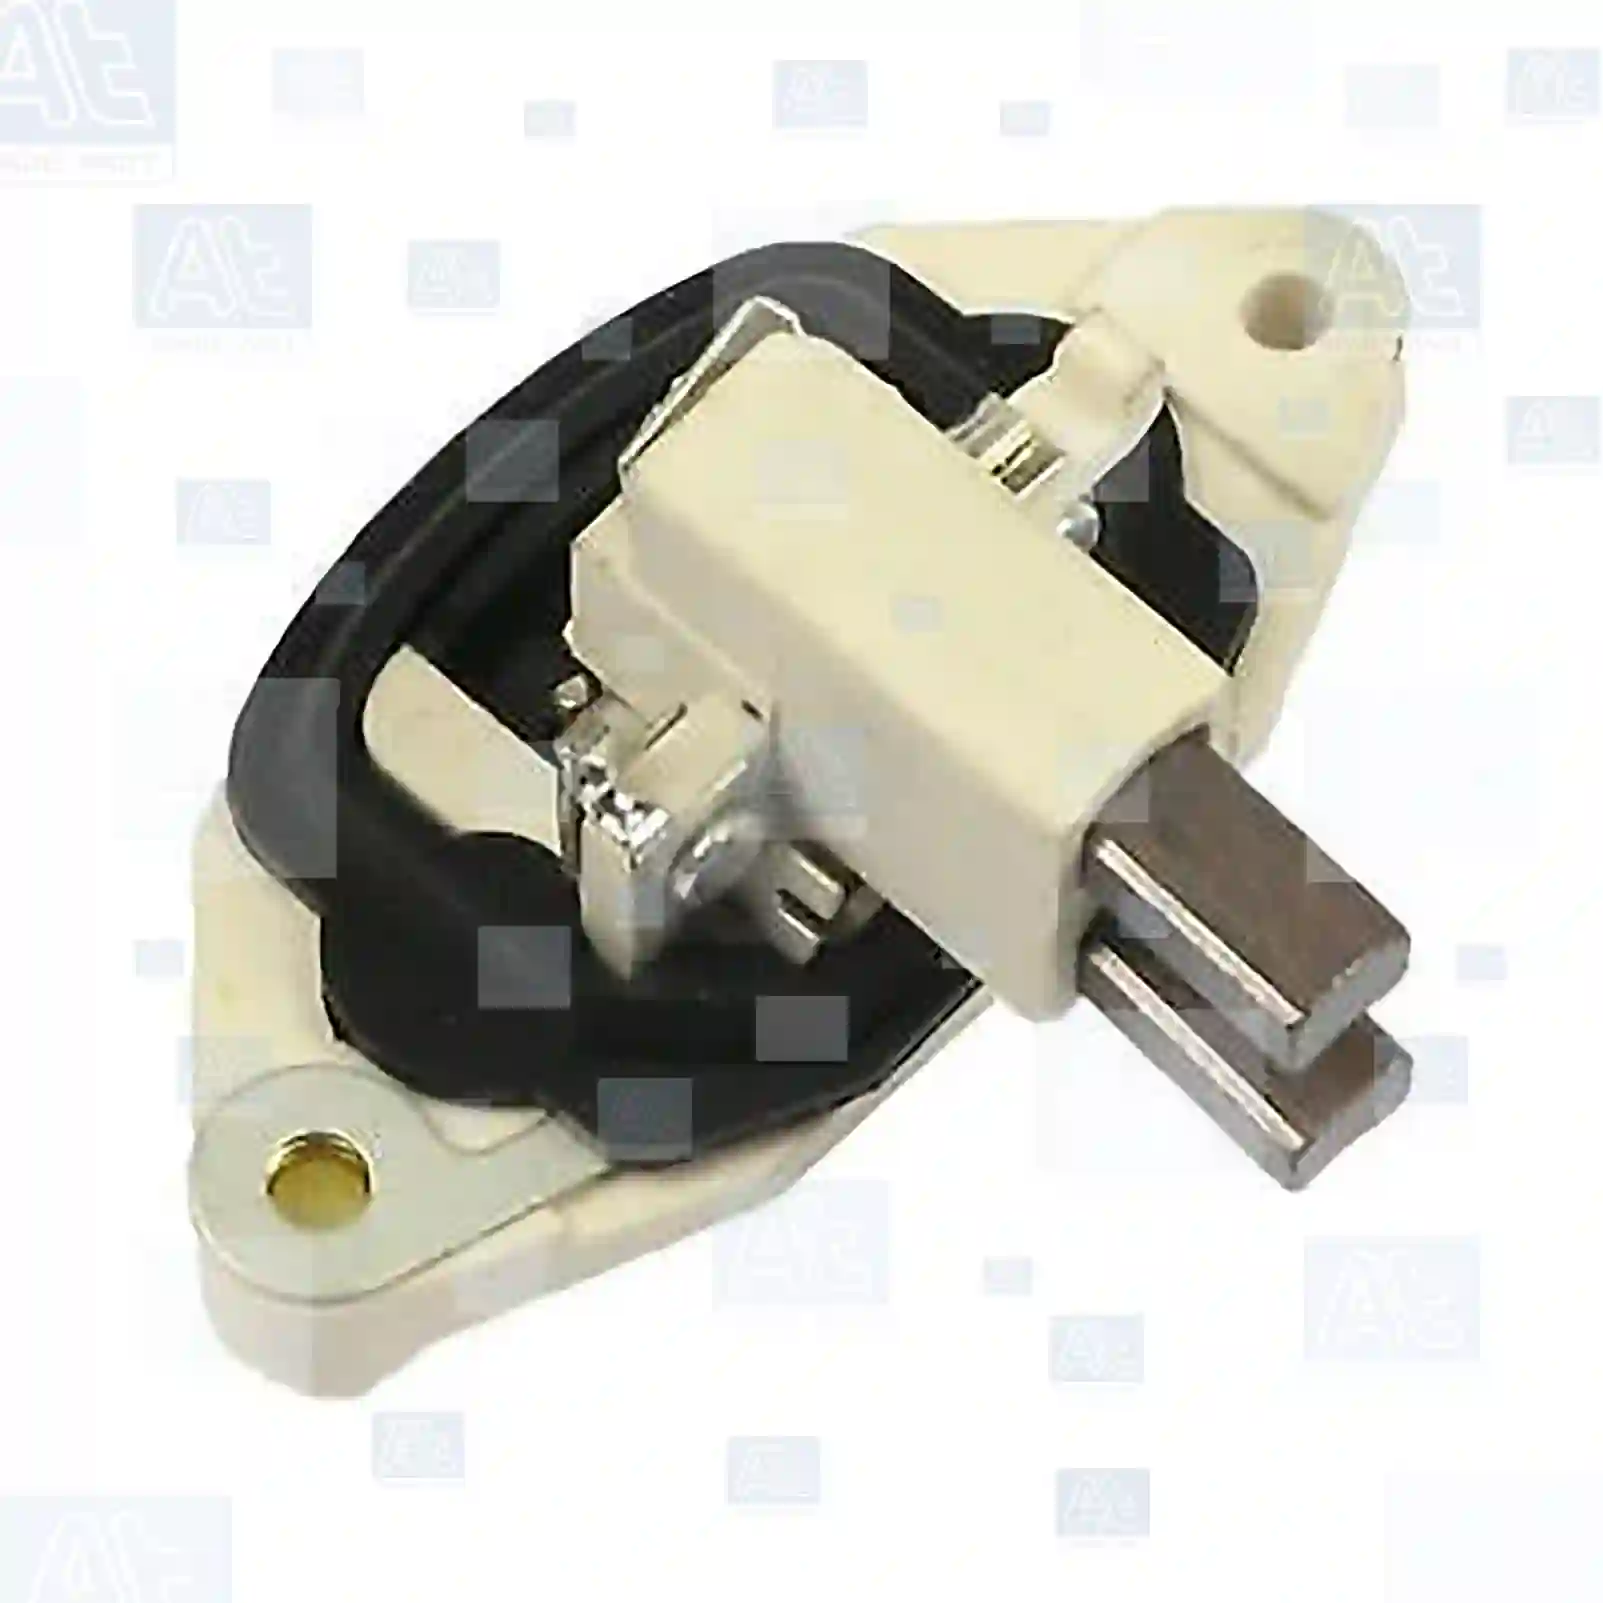 Regulator, alternator, 77710605, 113903801D, 2RP903803A, 79106750, E156758, 2Y-9541, 3870981, 3870982, 0068353, 0068499, 0694060, 1356286, 1356289, 1606217, 1606935, 1676162, 3239266, 371963, 68353, 68499, 68499S1, 694060, 9600908, 01171370, 01178336, 01320913, 08122152, 08125152, 08198422, 79074715, 79078923, V835362076000, 7506957, 75206957, 79078923, 8198422, 93158421, 07506957, 08198422, 75206957, 79078923, 93158421, 6094906, 6904906, 52252897, 3079392R91, 04701484, 07910675, 08122152, 08198422, 21546106, 5801221919, 75206957, 79022473, 79074715, 79078923, 8122152, 8198422, 93158421, 01171370, 01173070, 01178336, 01318299, 01320913, 08122152, 08125152, 5004185, 5603582, 560358208, 51256016005, 81256016014, 81256016016, 81256016023, 81256016024, 81256016027, 81256016031, 81256016033, 81256016035, 88256016004, K0001178336, K0001320913, 0001541905, 0001549406, 0001953438, 0021546106, 0021548406, 0021549406, 0021549906, 0031540006, 0041548702, 3451547101, 605711120010, D0641565, DO641565, 5000297997, 5001831960, 1117253, 1118188, 117253, 11995058, 1387616, 362645, 74123290050, 74213290050, 7421329006, 7421341001, 7421347002, 0001117344, 1134006, 61200090707, 61500090729, 11992579, 11995058, 1356289, 1606935, 1625880, 1698185, 21058175, 3239266, 624508, 68353, 68499, 6889019, 694060, 900908, 9600908, 043903803C, 113903801D, 2RP903803A, ZG20780-0008 ||  77710605 At Spare Part | Engine, Accelerator Pedal, Camshaft, Connecting Rod, Crankcase, Crankshaft, Cylinder Head, Engine Suspension Mountings, Exhaust Manifold, Exhaust Gas Recirculation, Filter Kits, Flywheel Housing, General Overhaul Kits, Engine, Intake Manifold, Oil Cleaner, Oil Cooler, Oil Filter, Oil Pump, Oil Sump, Piston & Liner, Sensor & Switch, Timing Case, Turbocharger, Cooling System, Belt Tensioner, Coolant Filter, Coolant Pipe, Corrosion Prevention Agent, Drive, Expansion Tank, Fan, Intercooler, Monitors & Gauges, Radiator, Thermostat, V-Belt / Timing belt, Water Pump, Fuel System, Electronical Injector Unit, Feed Pump, Fuel Filter, cpl., Fuel Gauge Sender,  Fuel Line, Fuel Pump, Fuel Tank, Injection Line Kit, Injection Pump, Exhaust System, Clutch & Pedal, Gearbox, Propeller Shaft, Axles, Brake System, Hubs & Wheels, Suspension, Leaf Spring, Universal Parts / Accessories, Steering, Electrical System, Cabin Regulator, alternator, 77710605, 113903801D, 2RP903803A, 79106750, E156758, 2Y-9541, 3870981, 3870982, 0068353, 0068499, 0694060, 1356286, 1356289, 1606217, 1606935, 1676162, 3239266, 371963, 68353, 68499, 68499S1, 694060, 9600908, 01171370, 01178336, 01320913, 08122152, 08125152, 08198422, 79074715, 79078923, V835362076000, 7506957, 75206957, 79078923, 8198422, 93158421, 07506957, 08198422, 75206957, 79078923, 93158421, 6094906, 6904906, 52252897, 3079392R91, 04701484, 07910675, 08122152, 08198422, 21546106, 5801221919, 75206957, 79022473, 79074715, 79078923, 8122152, 8198422, 93158421, 01171370, 01173070, 01178336, 01318299, 01320913, 08122152, 08125152, 5004185, 5603582, 560358208, 51256016005, 81256016014, 81256016016, 81256016023, 81256016024, 81256016027, 81256016031, 81256016033, 81256016035, 88256016004, K0001178336, K0001320913, 0001541905, 0001549406, 0001953438, 0021546106, 0021548406, 0021549406, 0021549906, 0031540006, 0041548702, 3451547101, 605711120010, D0641565, DO641565, 5000297997, 5001831960, 1117253, 1118188, 117253, 11995058, 1387616, 362645, 74123290050, 74213290050, 7421329006, 7421341001, 7421347002, 0001117344, 1134006, 61200090707, 61500090729, 11992579, 11995058, 1356289, 1606935, 1625880, 1698185, 21058175, 3239266, 624508, 68353, 68499, 6889019, 694060, 900908, 9600908, 043903803C, 113903801D, 2RP903803A, ZG20780-0008 ||  77710605 At Spare Part | Engine, Accelerator Pedal, Camshaft, Connecting Rod, Crankcase, Crankshaft, Cylinder Head, Engine Suspension Mountings, Exhaust Manifold, Exhaust Gas Recirculation, Filter Kits, Flywheel Housing, General Overhaul Kits, Engine, Intake Manifold, Oil Cleaner, Oil Cooler, Oil Filter, Oil Pump, Oil Sump, Piston & Liner, Sensor & Switch, Timing Case, Turbocharger, Cooling System, Belt Tensioner, Coolant Filter, Coolant Pipe, Corrosion Prevention Agent, Drive, Expansion Tank, Fan, Intercooler, Monitors & Gauges, Radiator, Thermostat, V-Belt / Timing belt, Water Pump, Fuel System, Electronical Injector Unit, Feed Pump, Fuel Filter, cpl., Fuel Gauge Sender,  Fuel Line, Fuel Pump, Fuel Tank, Injection Line Kit, Injection Pump, Exhaust System, Clutch & Pedal, Gearbox, Propeller Shaft, Axles, Brake System, Hubs & Wheels, Suspension, Leaf Spring, Universal Parts / Accessories, Steering, Electrical System, Cabin